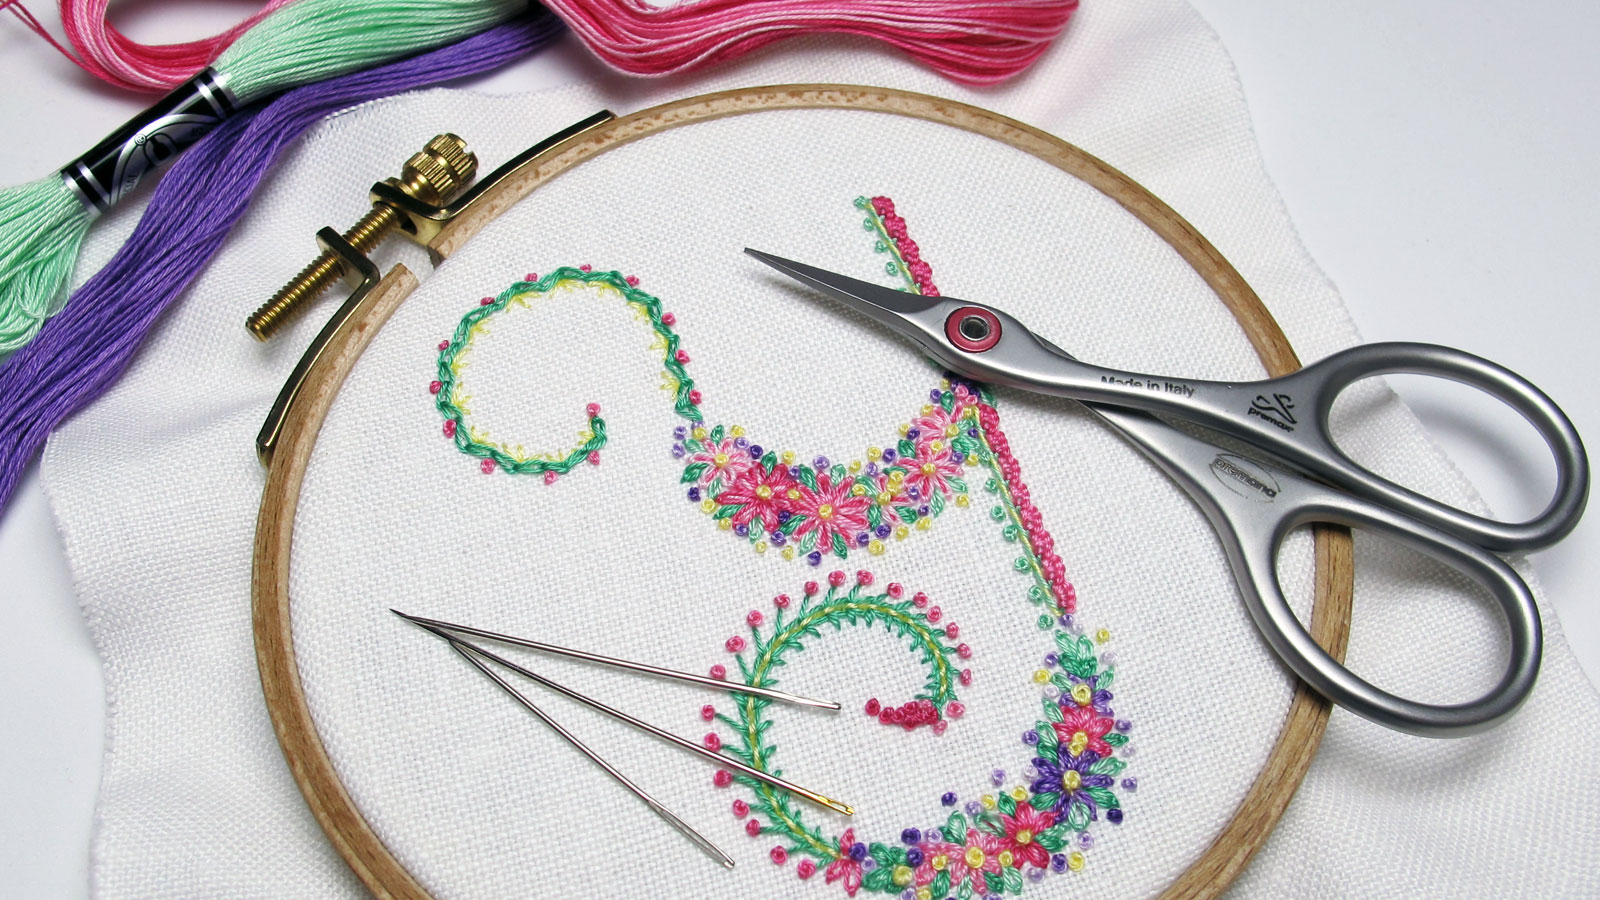 Embroidery Alphabet Patterns Free Needlenthread Tips Tricks And Great Resources For Hand Embroidery